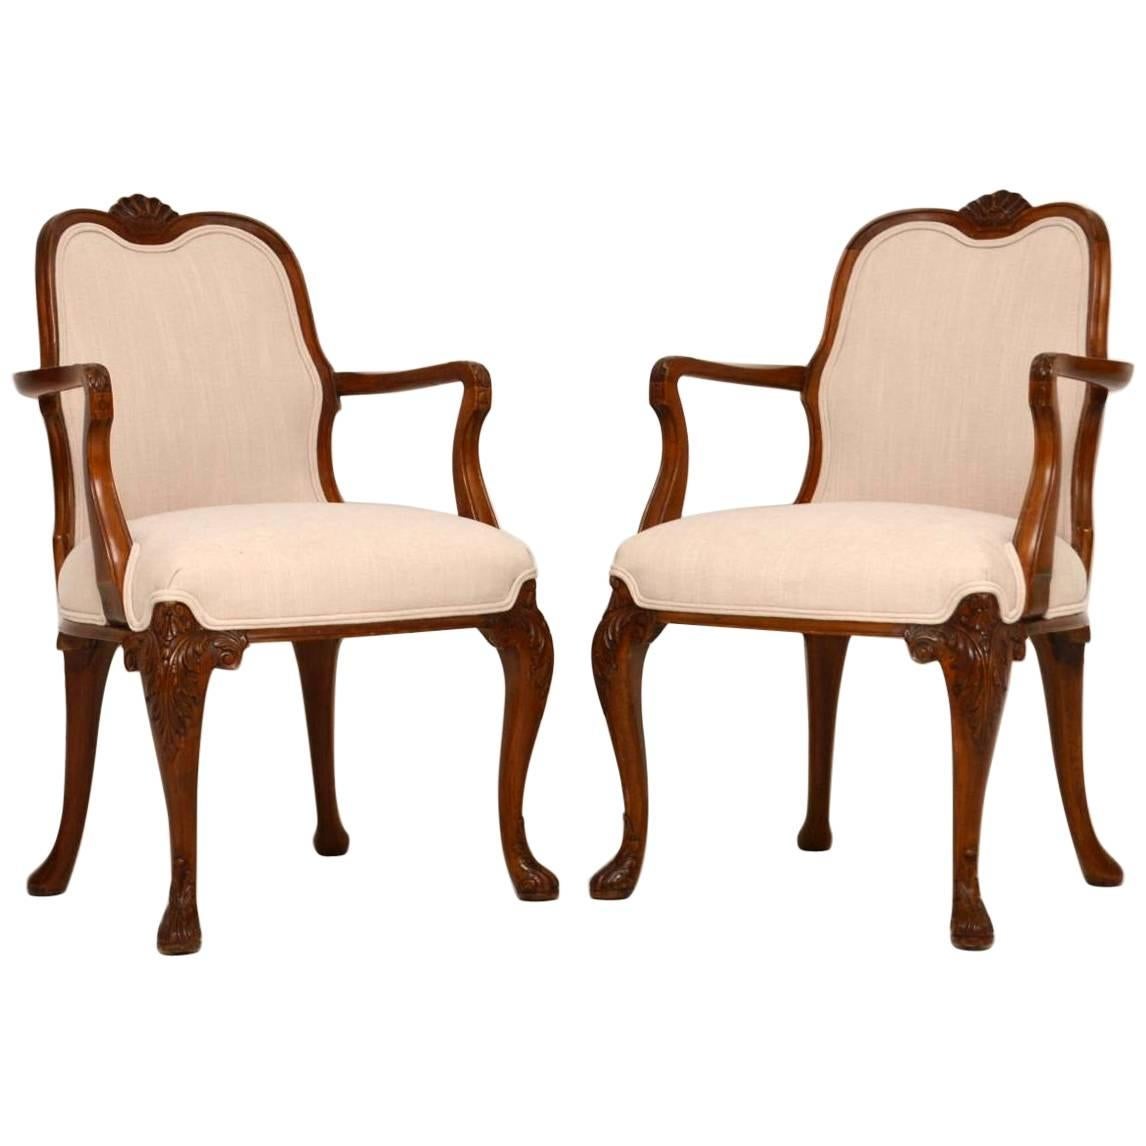 Pair of Antique Carved Walnut Upholstered Armchairs